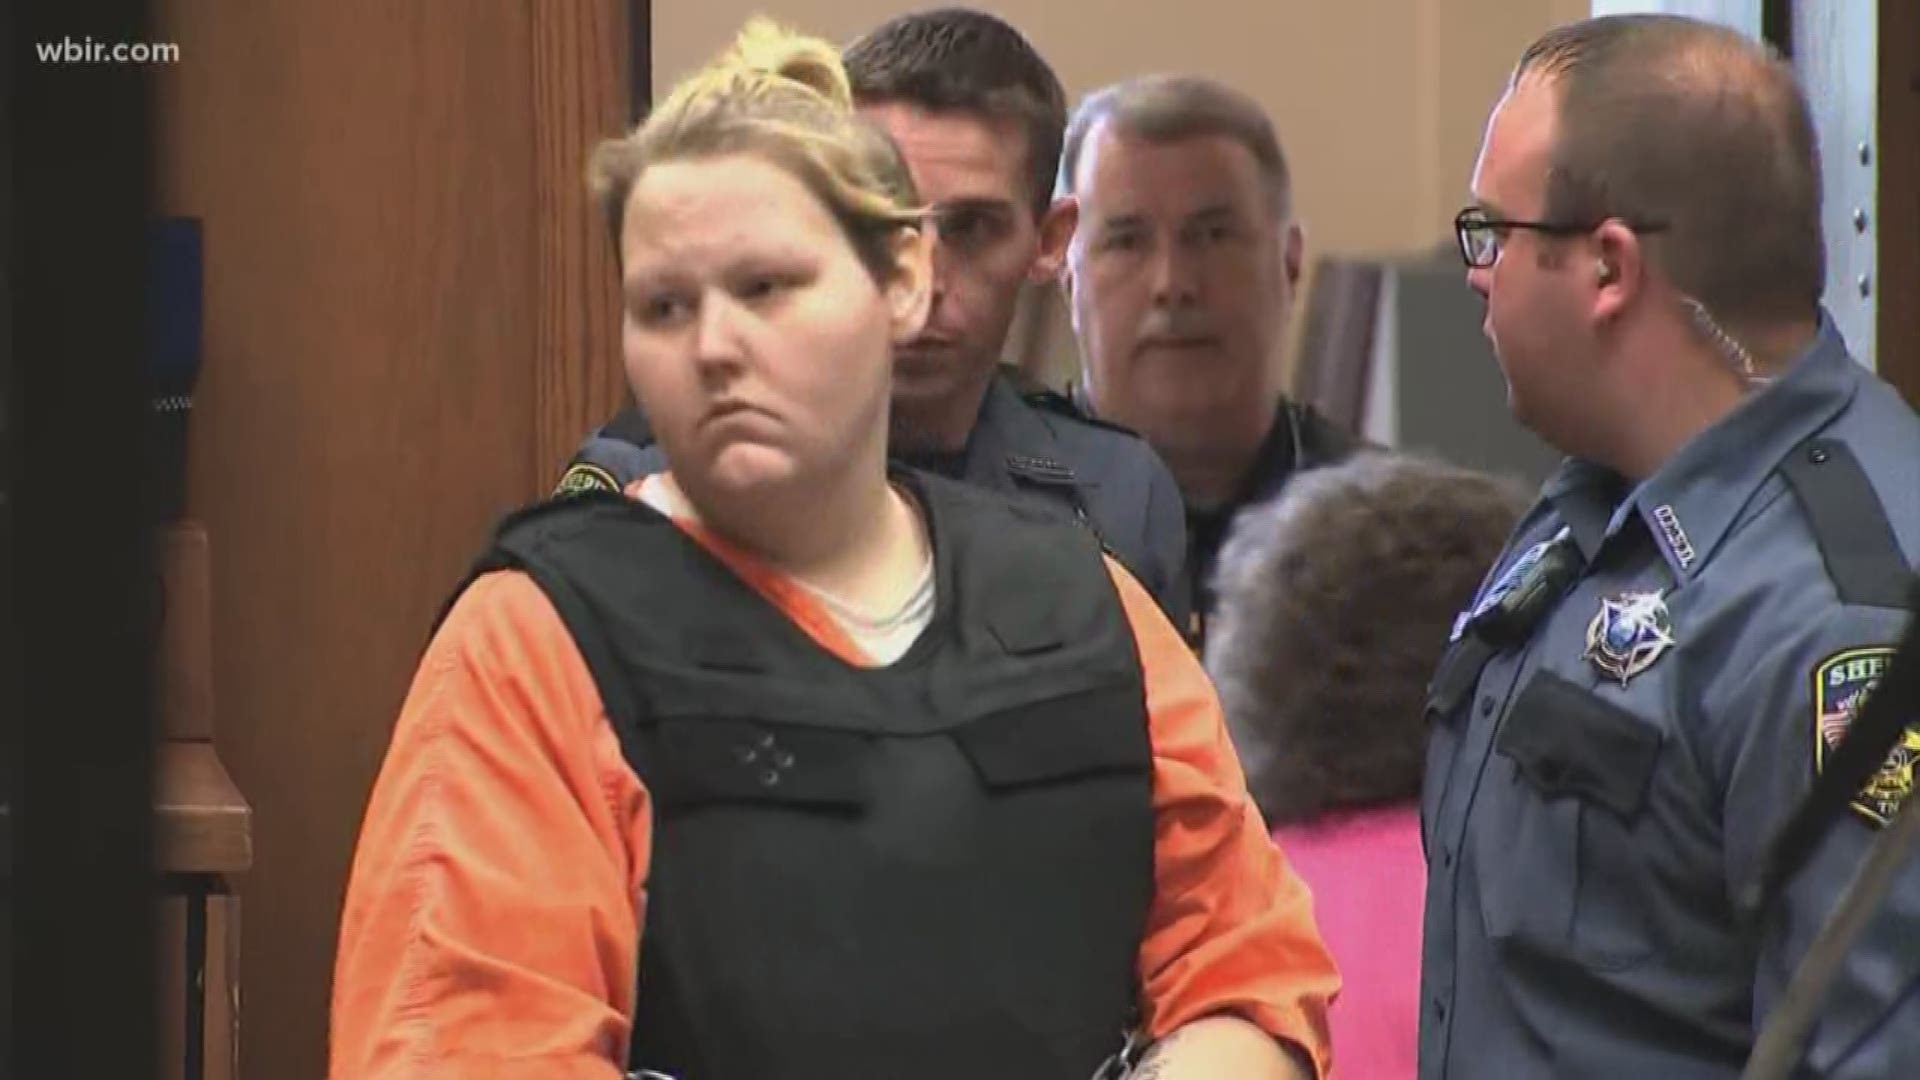 Authorities say Krystal Daniels admitted to being home when her husband, Joseph Ray Daniels, killed their son.